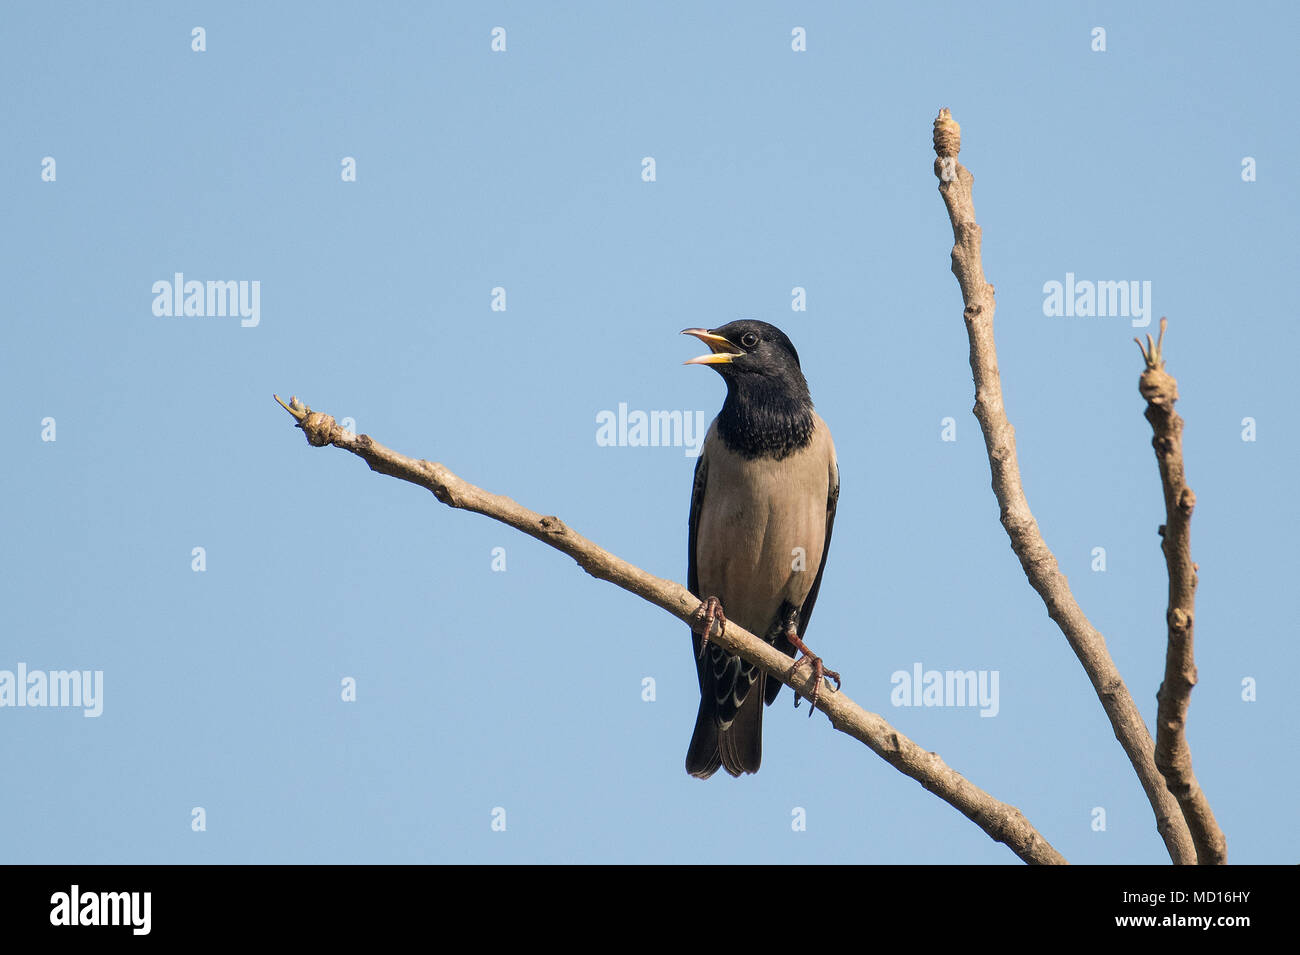 Bird: Portrait of a Singing Male Rosy Starling Perched on a Tree Branch Stock Photo